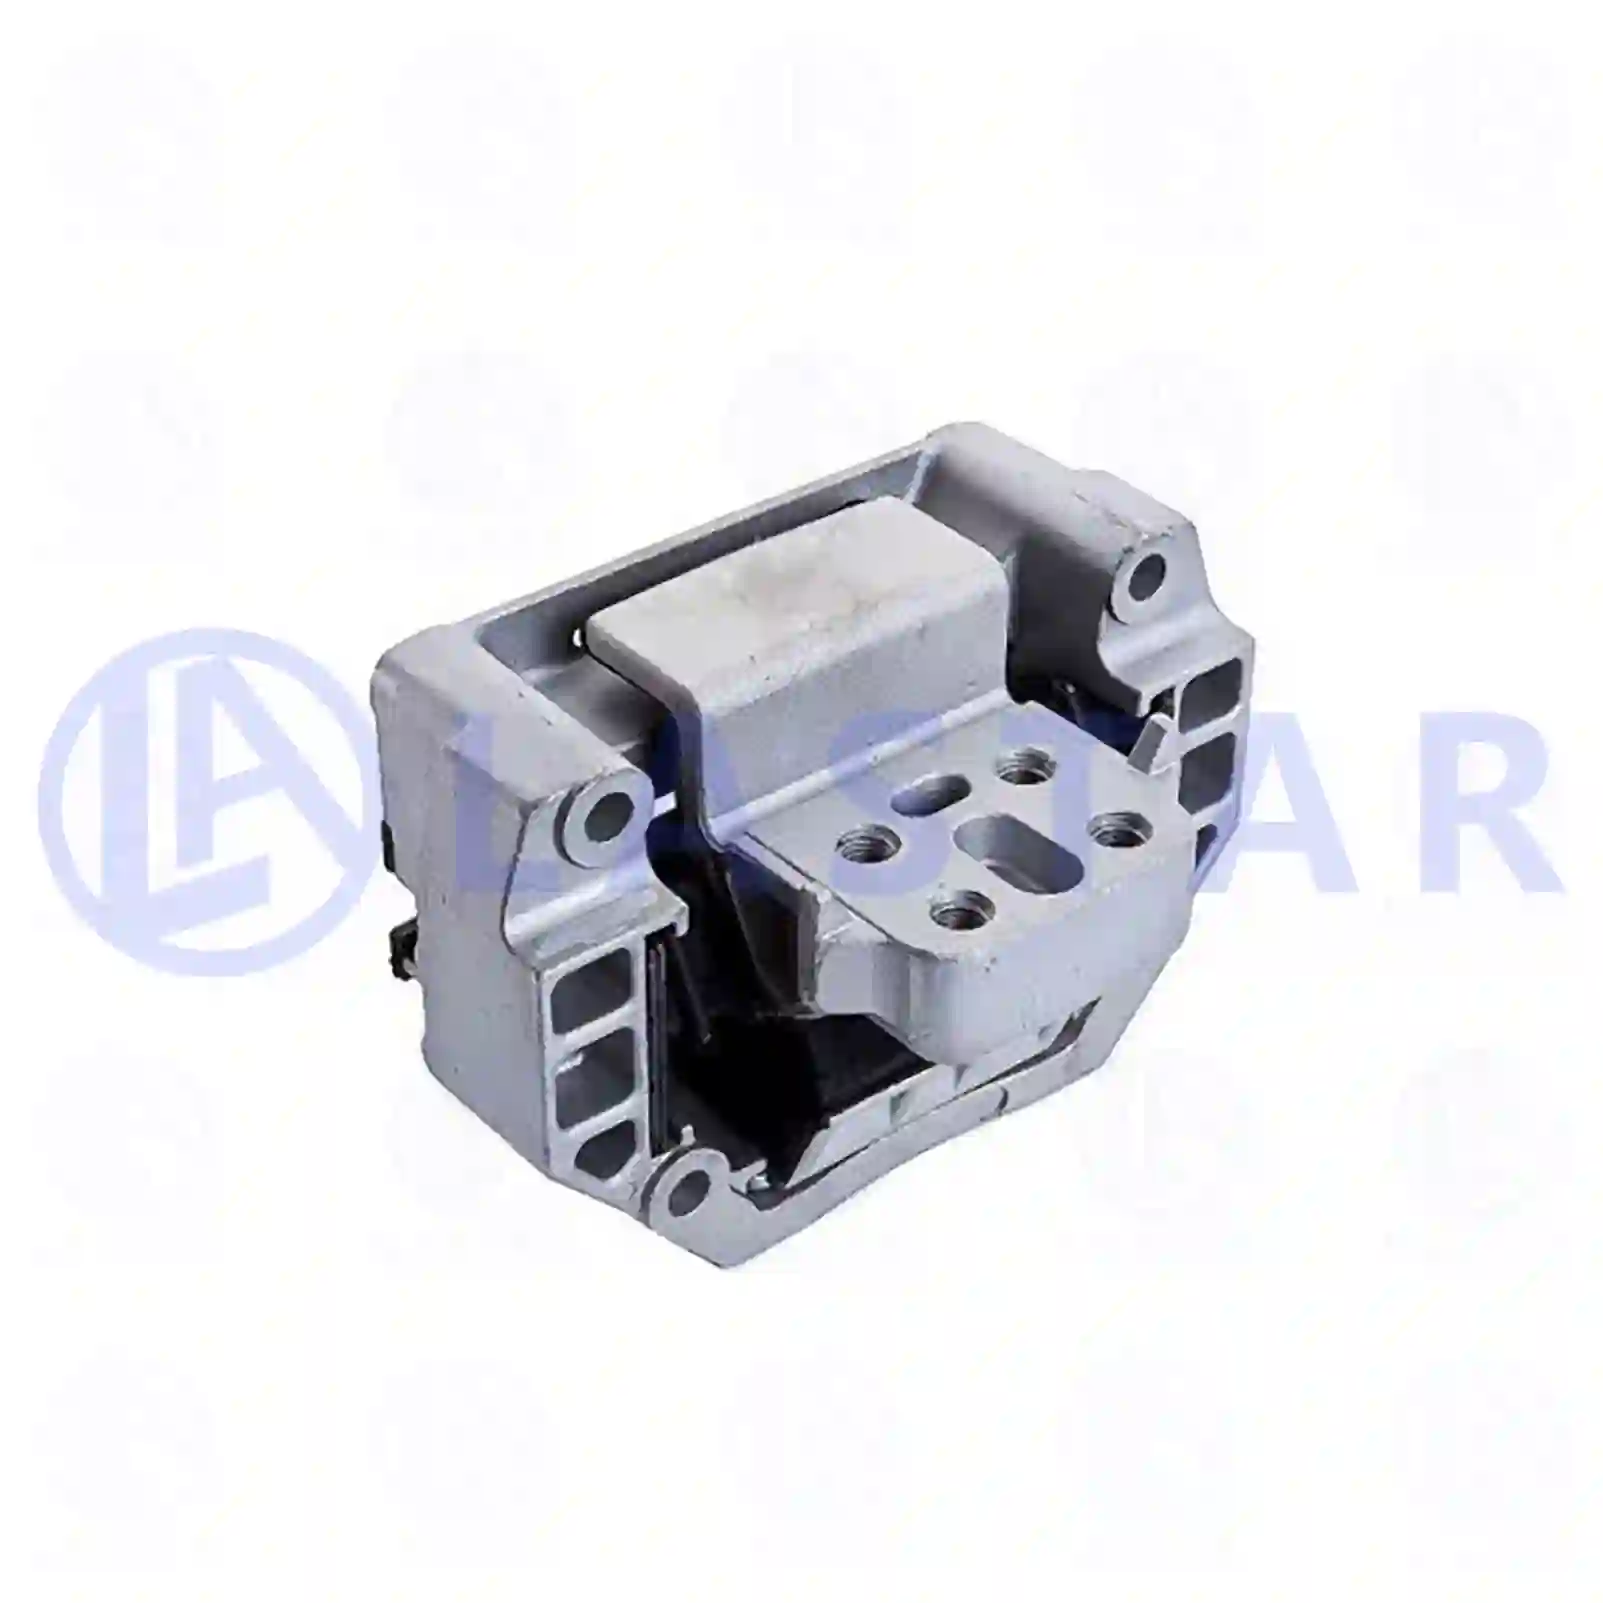 Gearbox mounting, reinforced, 77733716, 1449287, 1469287, 1779609, 1782203, 1801745, 1906590, 1921972, ZG30553-0008 ||  77733716 Lastar Spare Part | Truck Spare Parts, Auotomotive Spare Parts Gearbox mounting, reinforced, 77733716, 1449287, 1469287, 1779609, 1782203, 1801745, 1906590, 1921972, ZG30553-0008 ||  77733716 Lastar Spare Part | Truck Spare Parts, Auotomotive Spare Parts